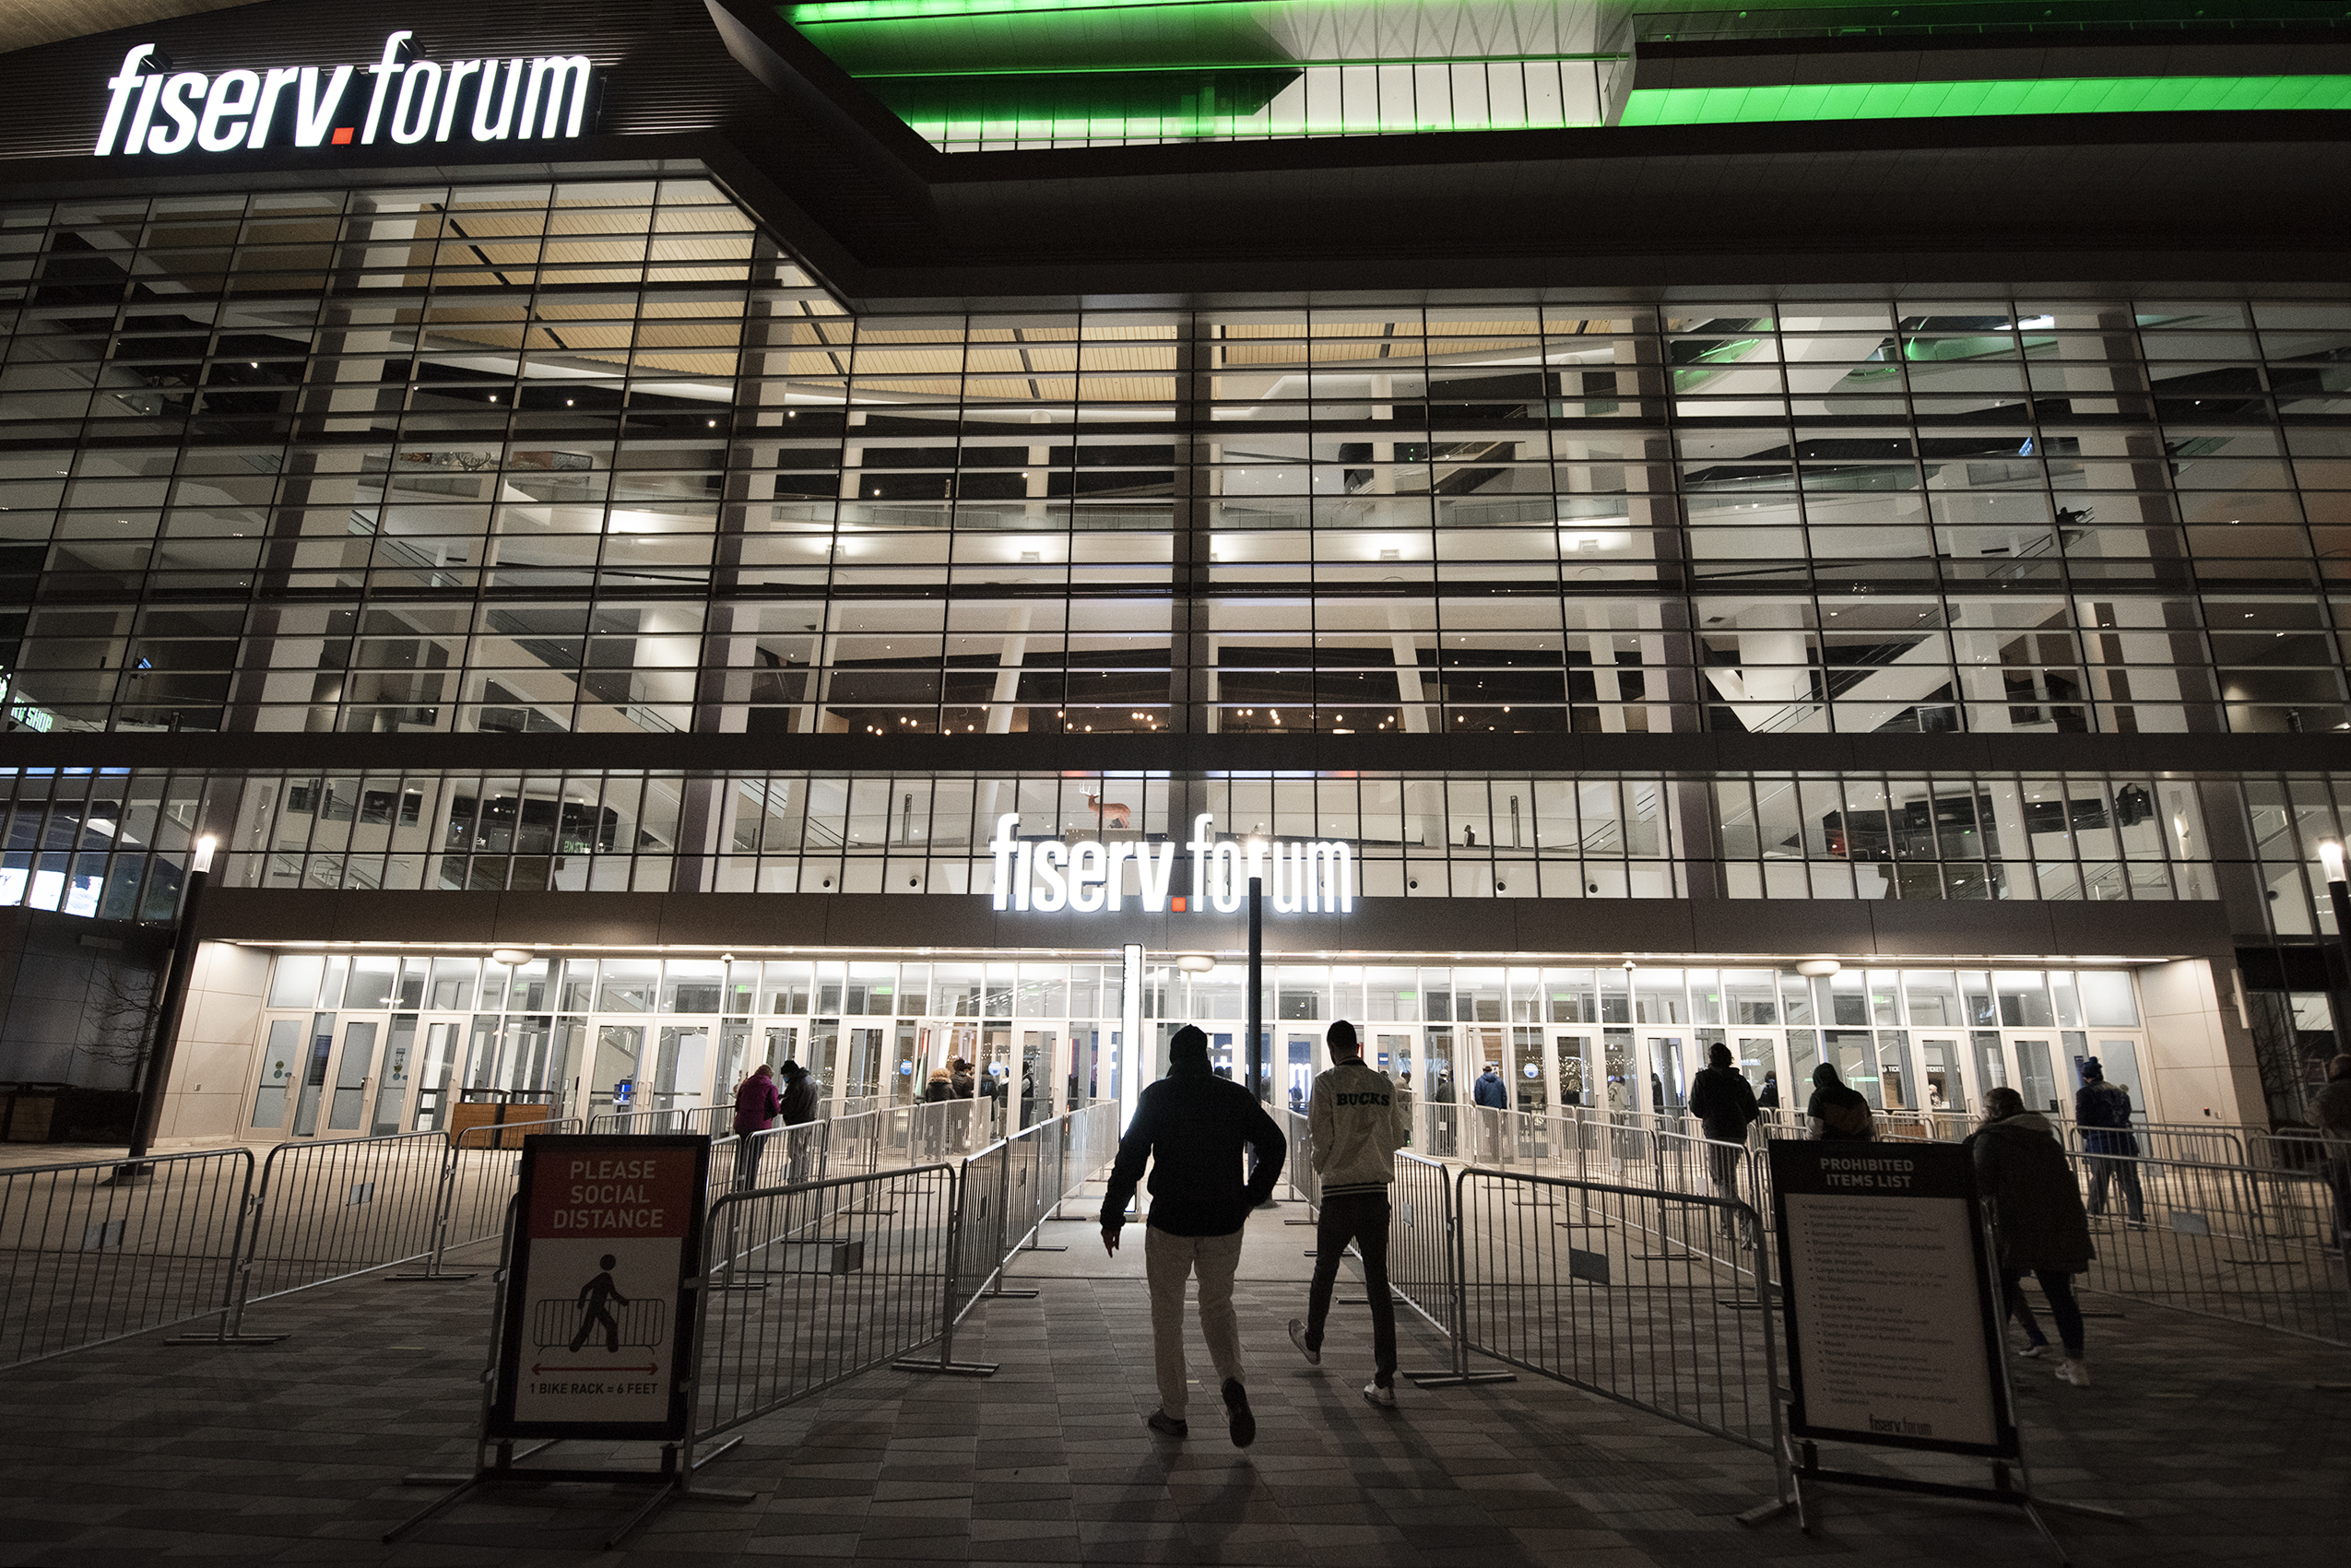 People enter the Fiserv Forum at night